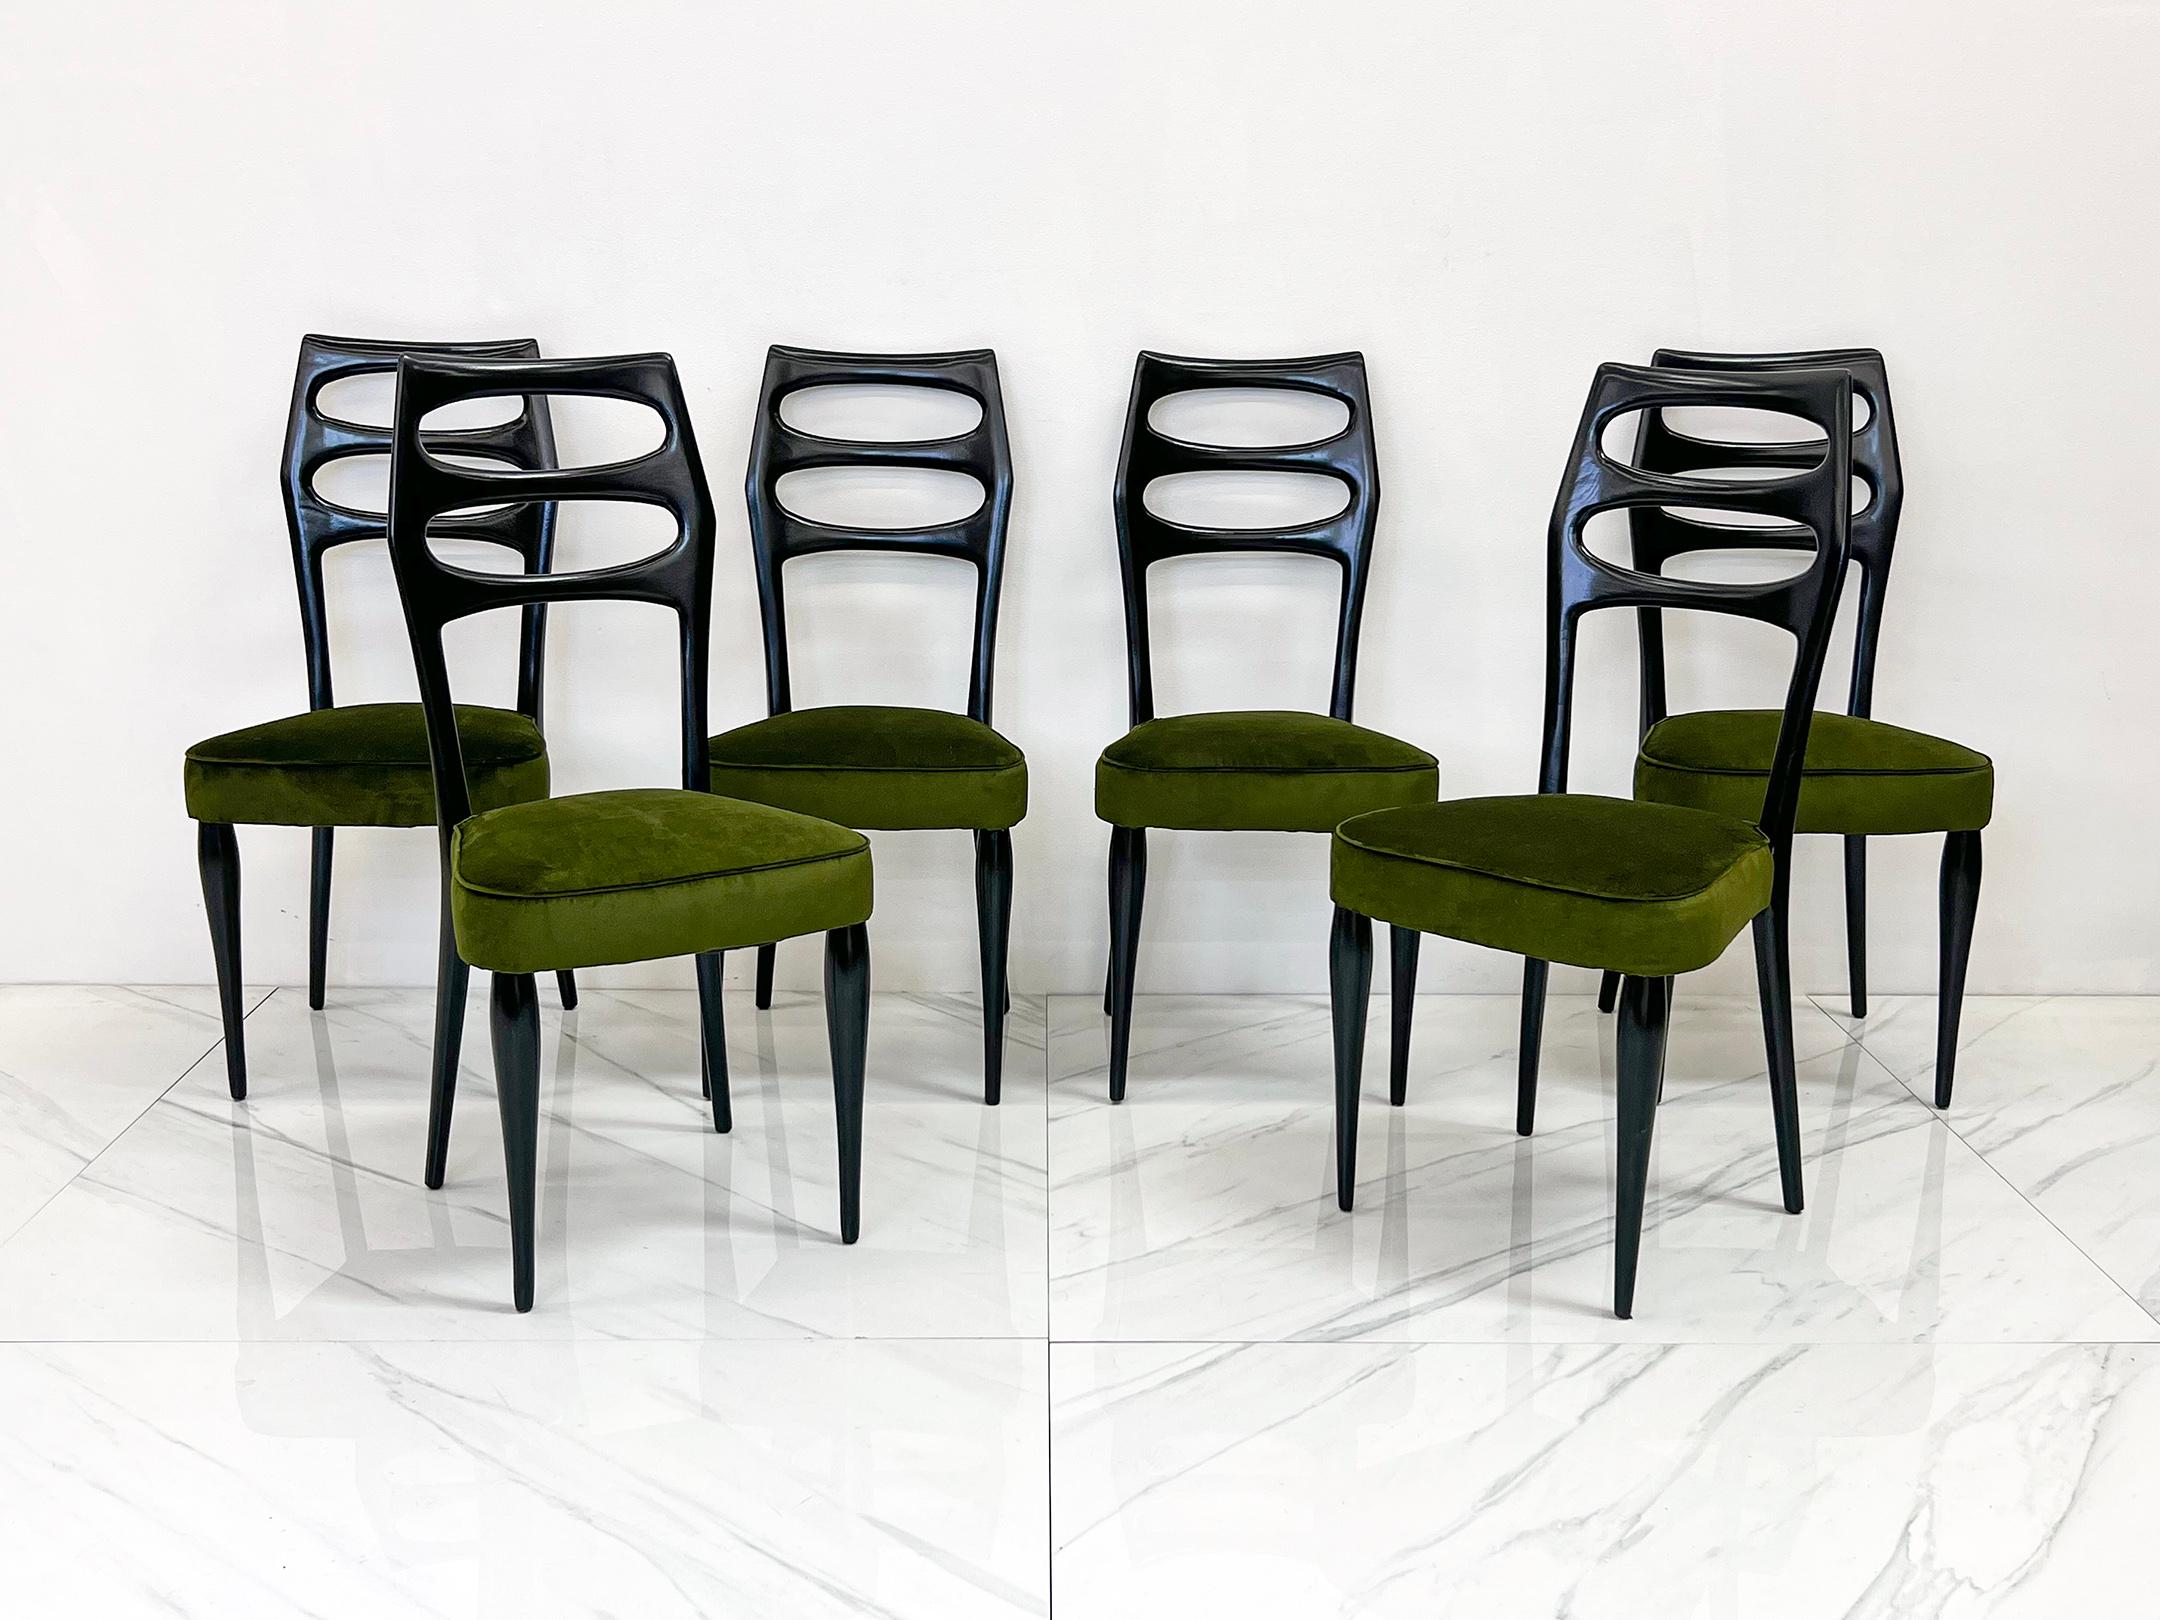 These chairs are absolutely stunning. Attributed to Italian designer and architect Paolo Buffa, this set of 6 dining chairs are sleek, refined, stylish and timelessly modern even at around 73 years old.

We've had these chairs completely